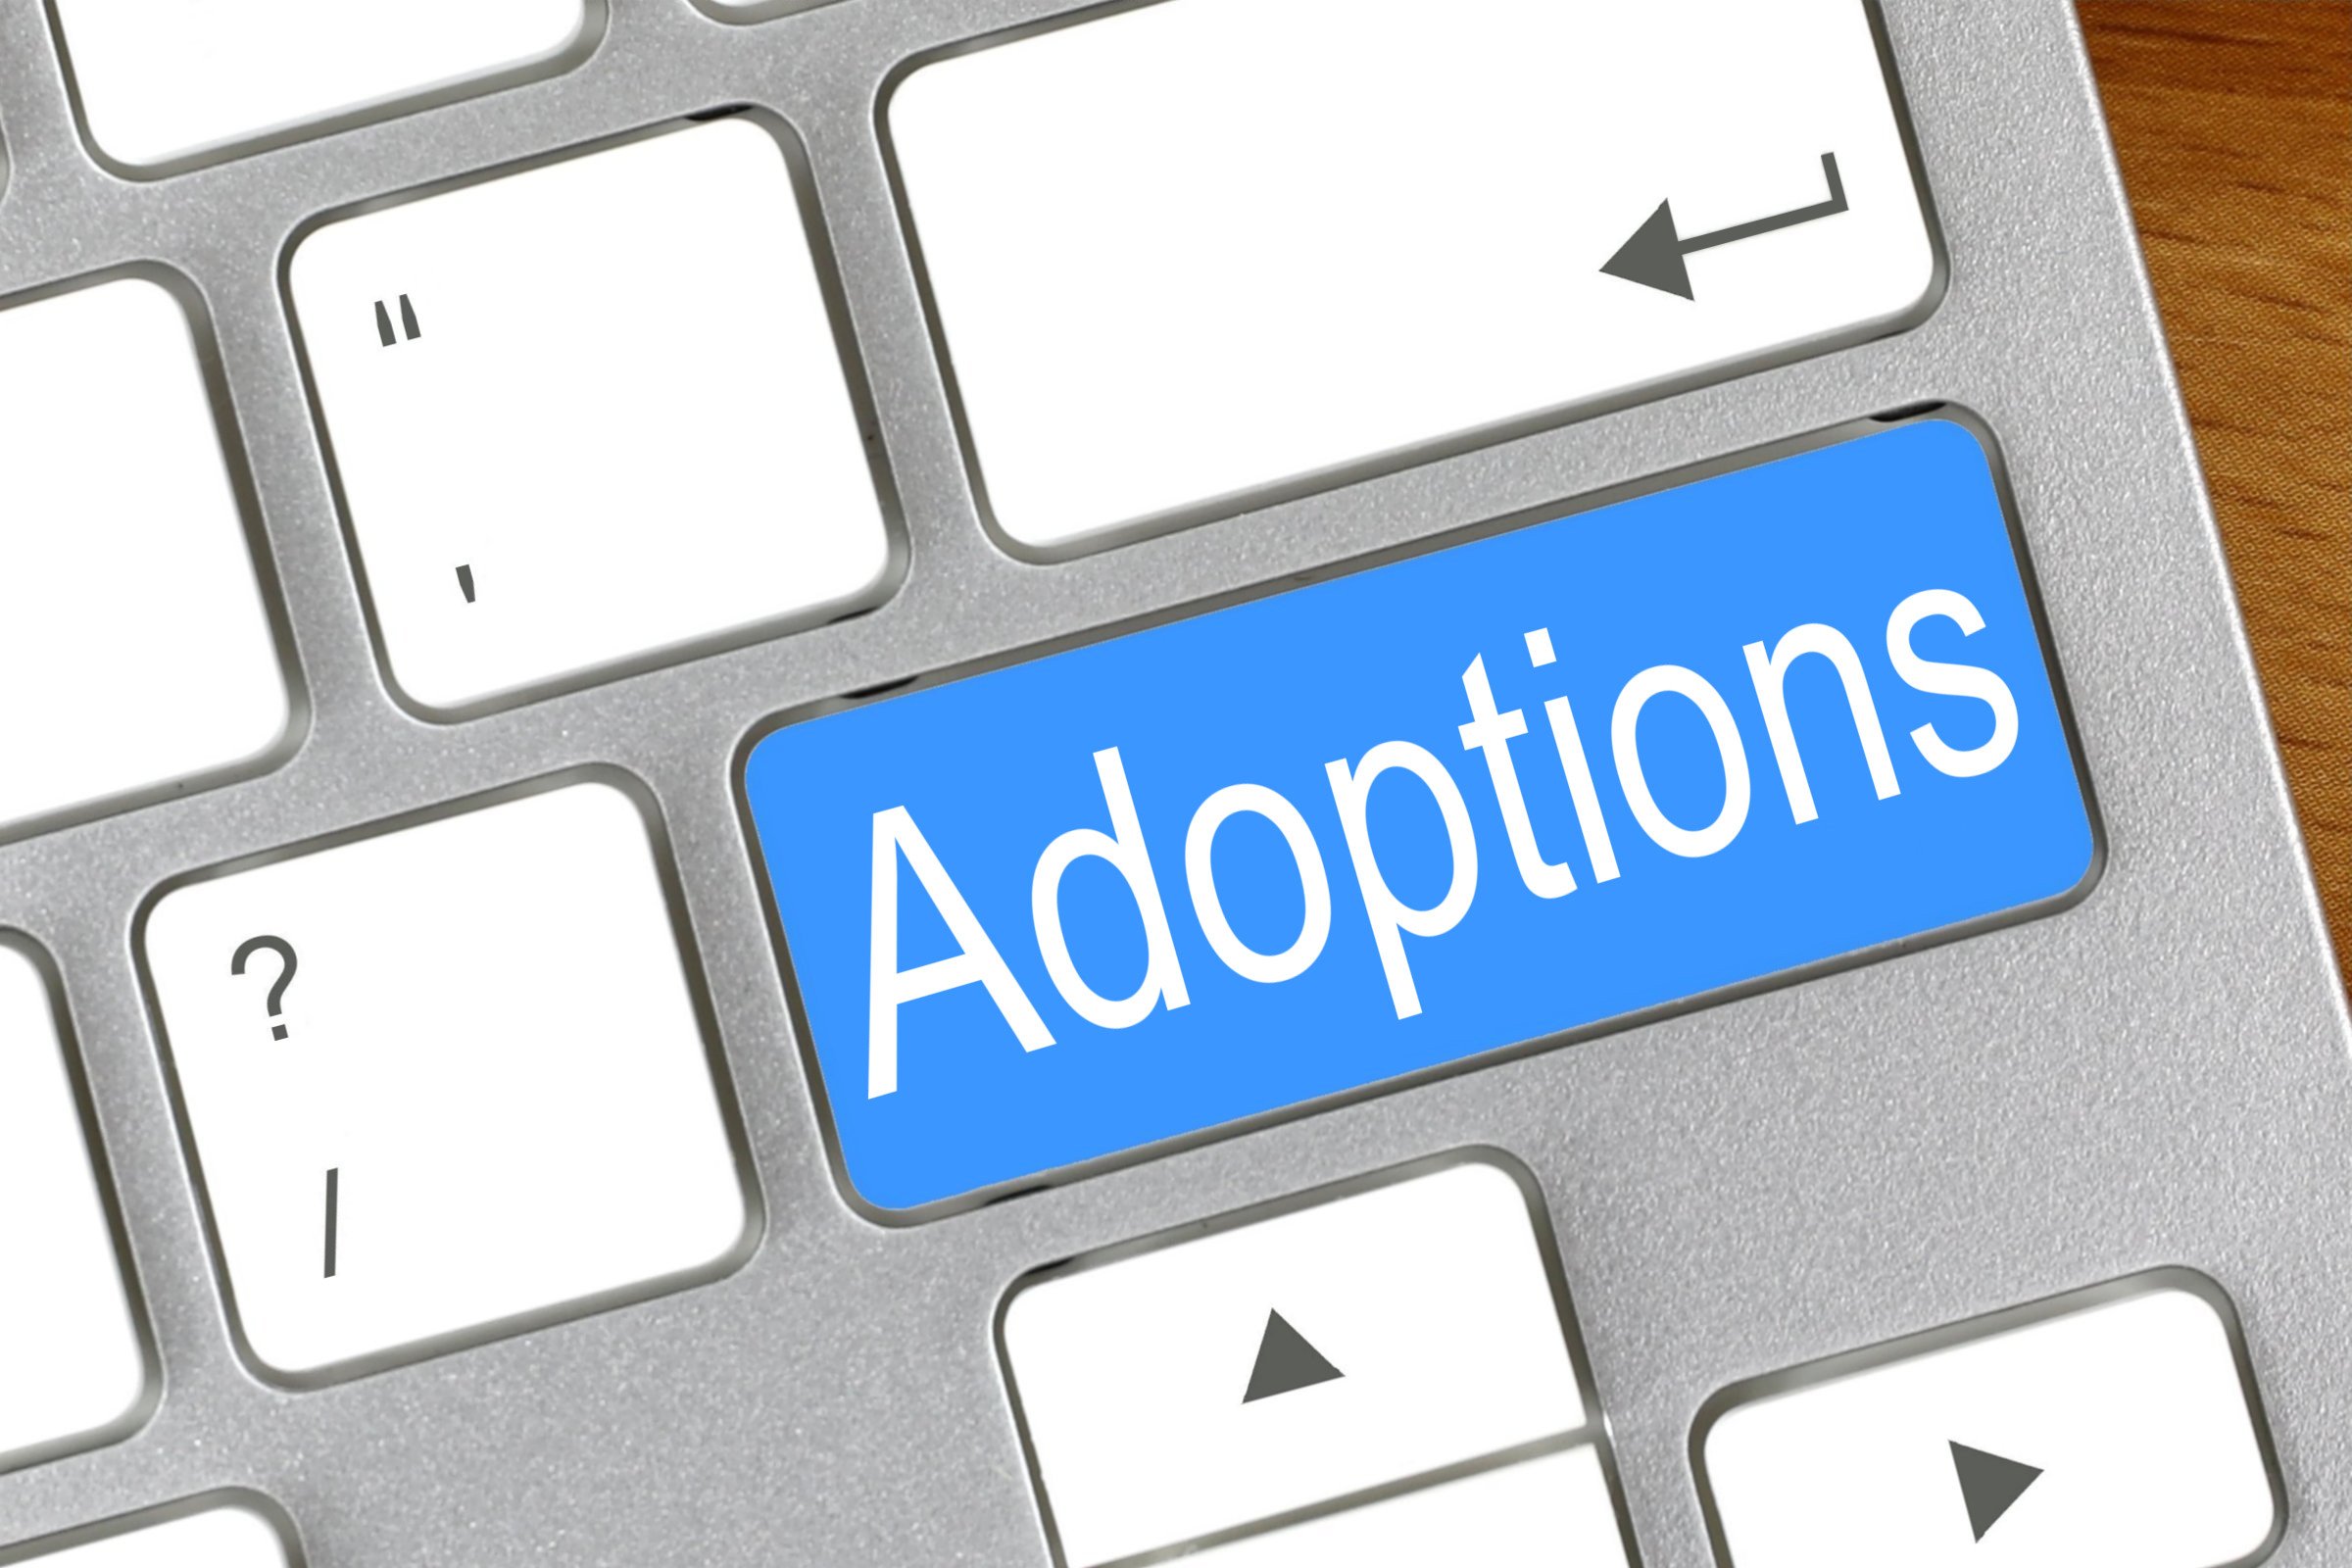 adoptions-free-of-charge-creative-commons-keyboard-image